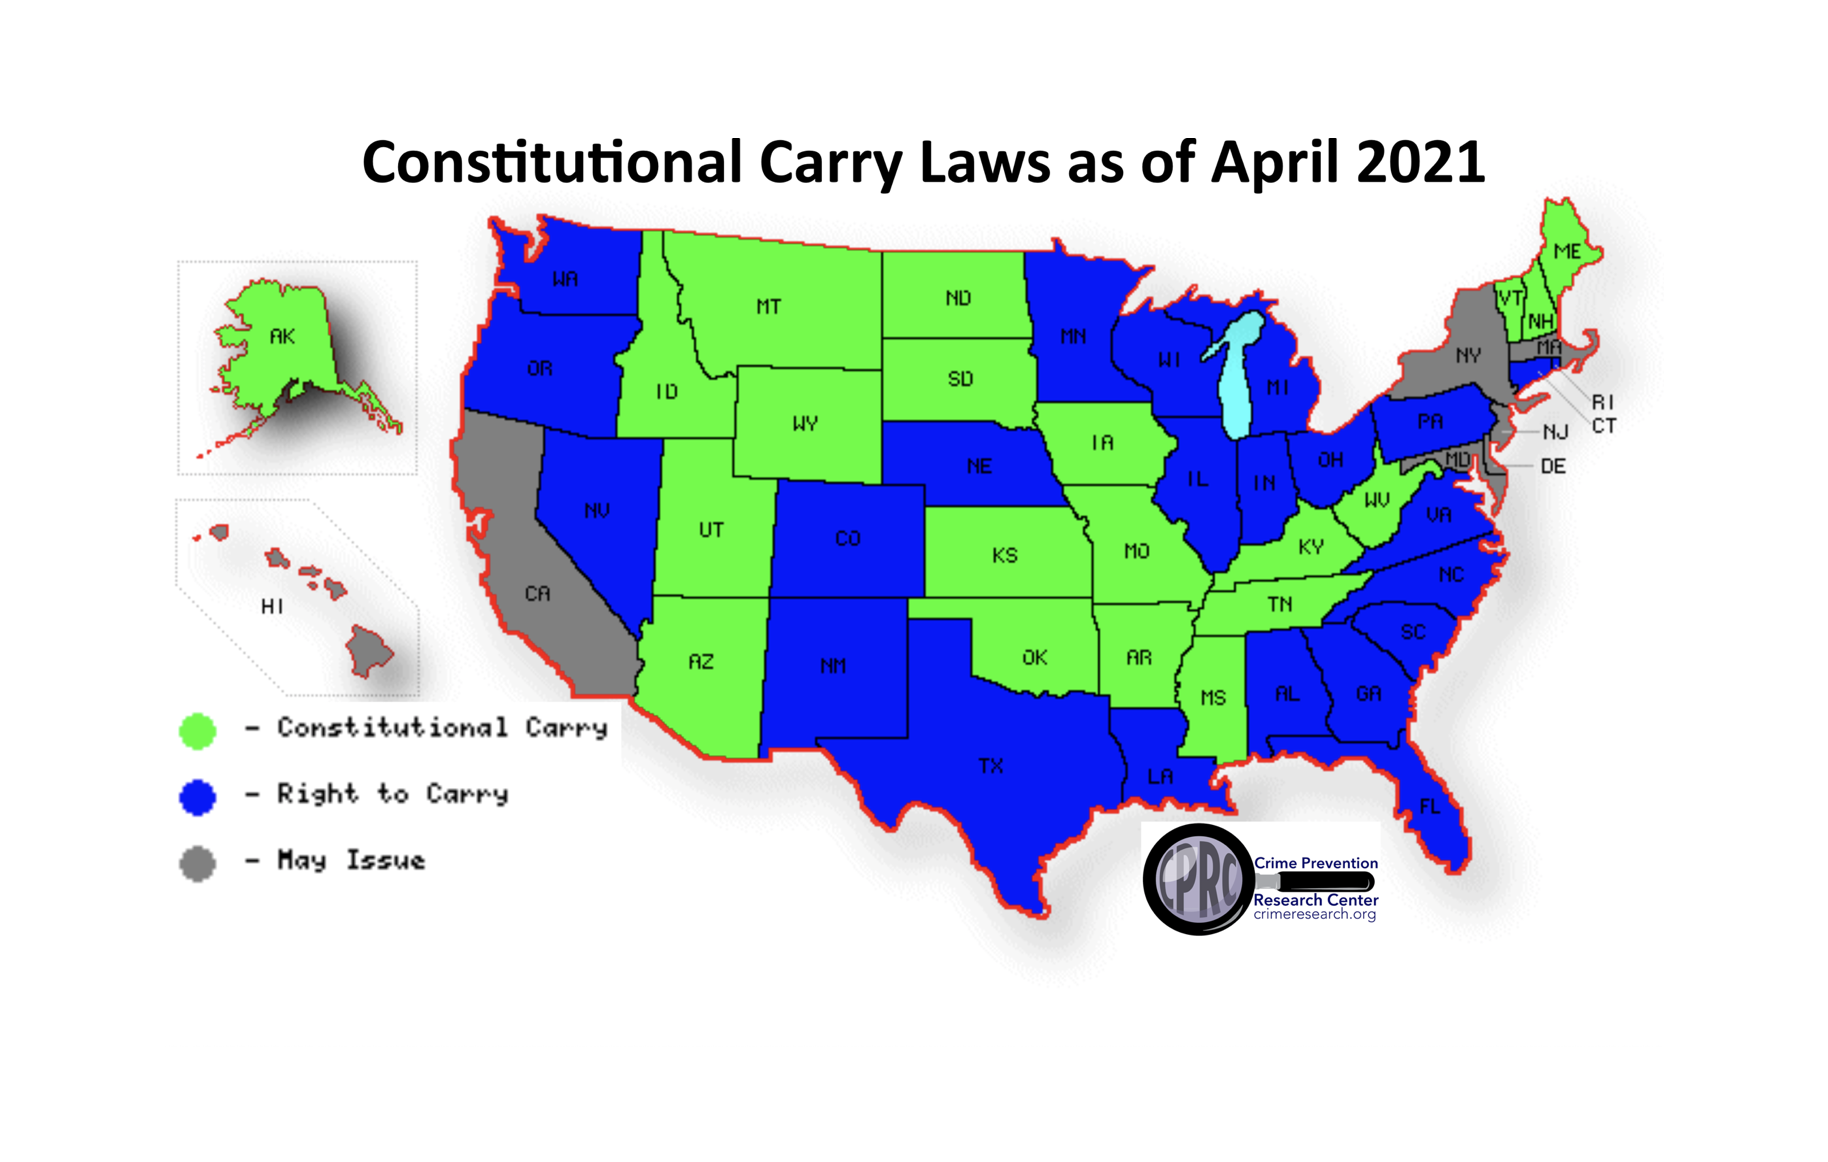 There are 20 Constitutional Carry States